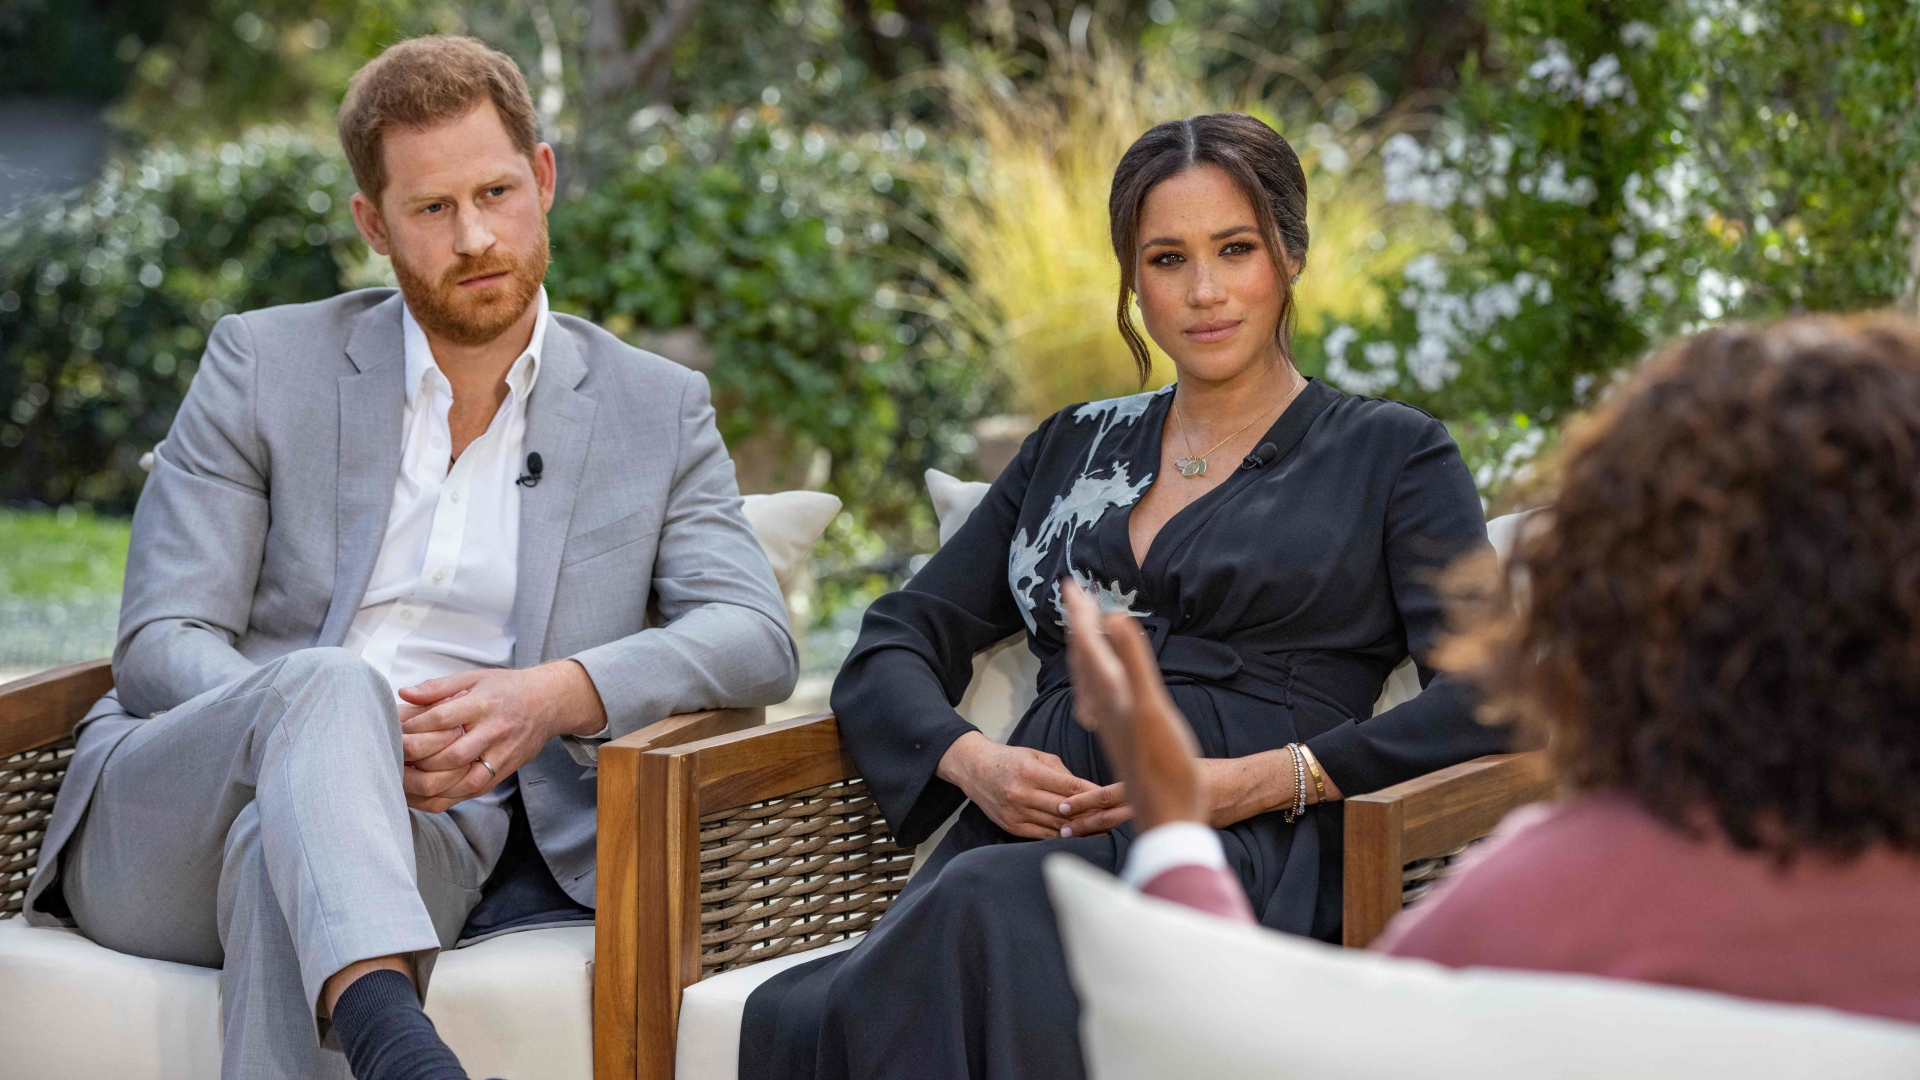 Boston Tea Party Memes Dominate Twitter After Meghan And Harry S Oprah Interview The Washington Post